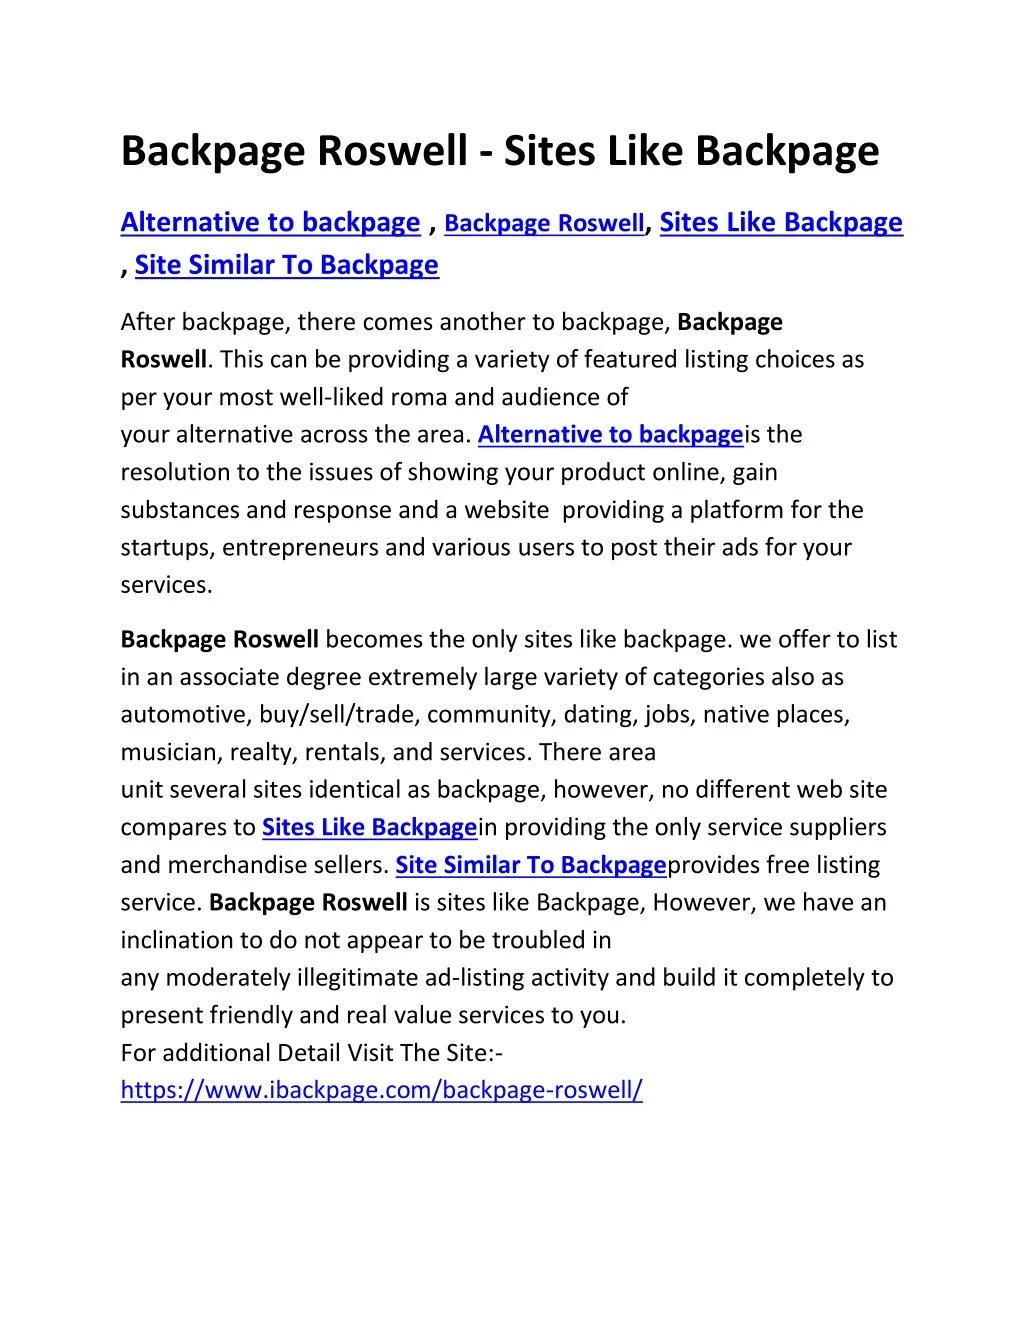 backpage roswell sites like backpage